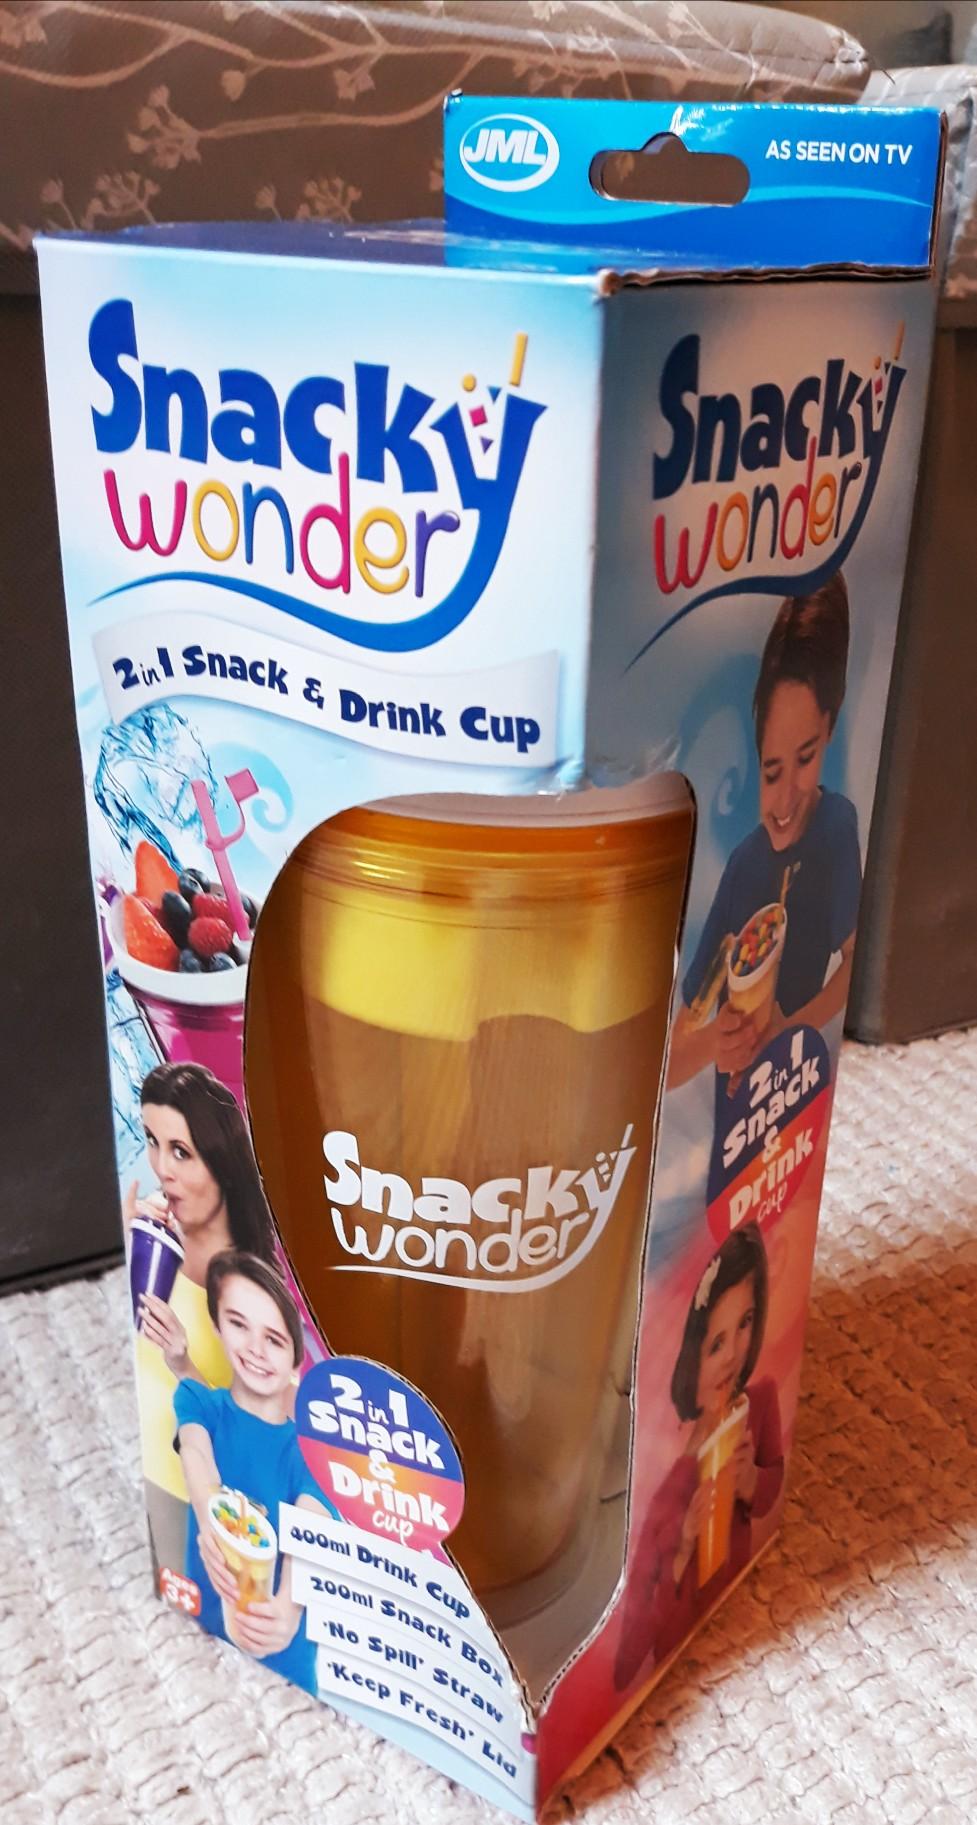 A Snacky Wonder 2 In 1 Movie Travel Snack Box And Drink Cup With